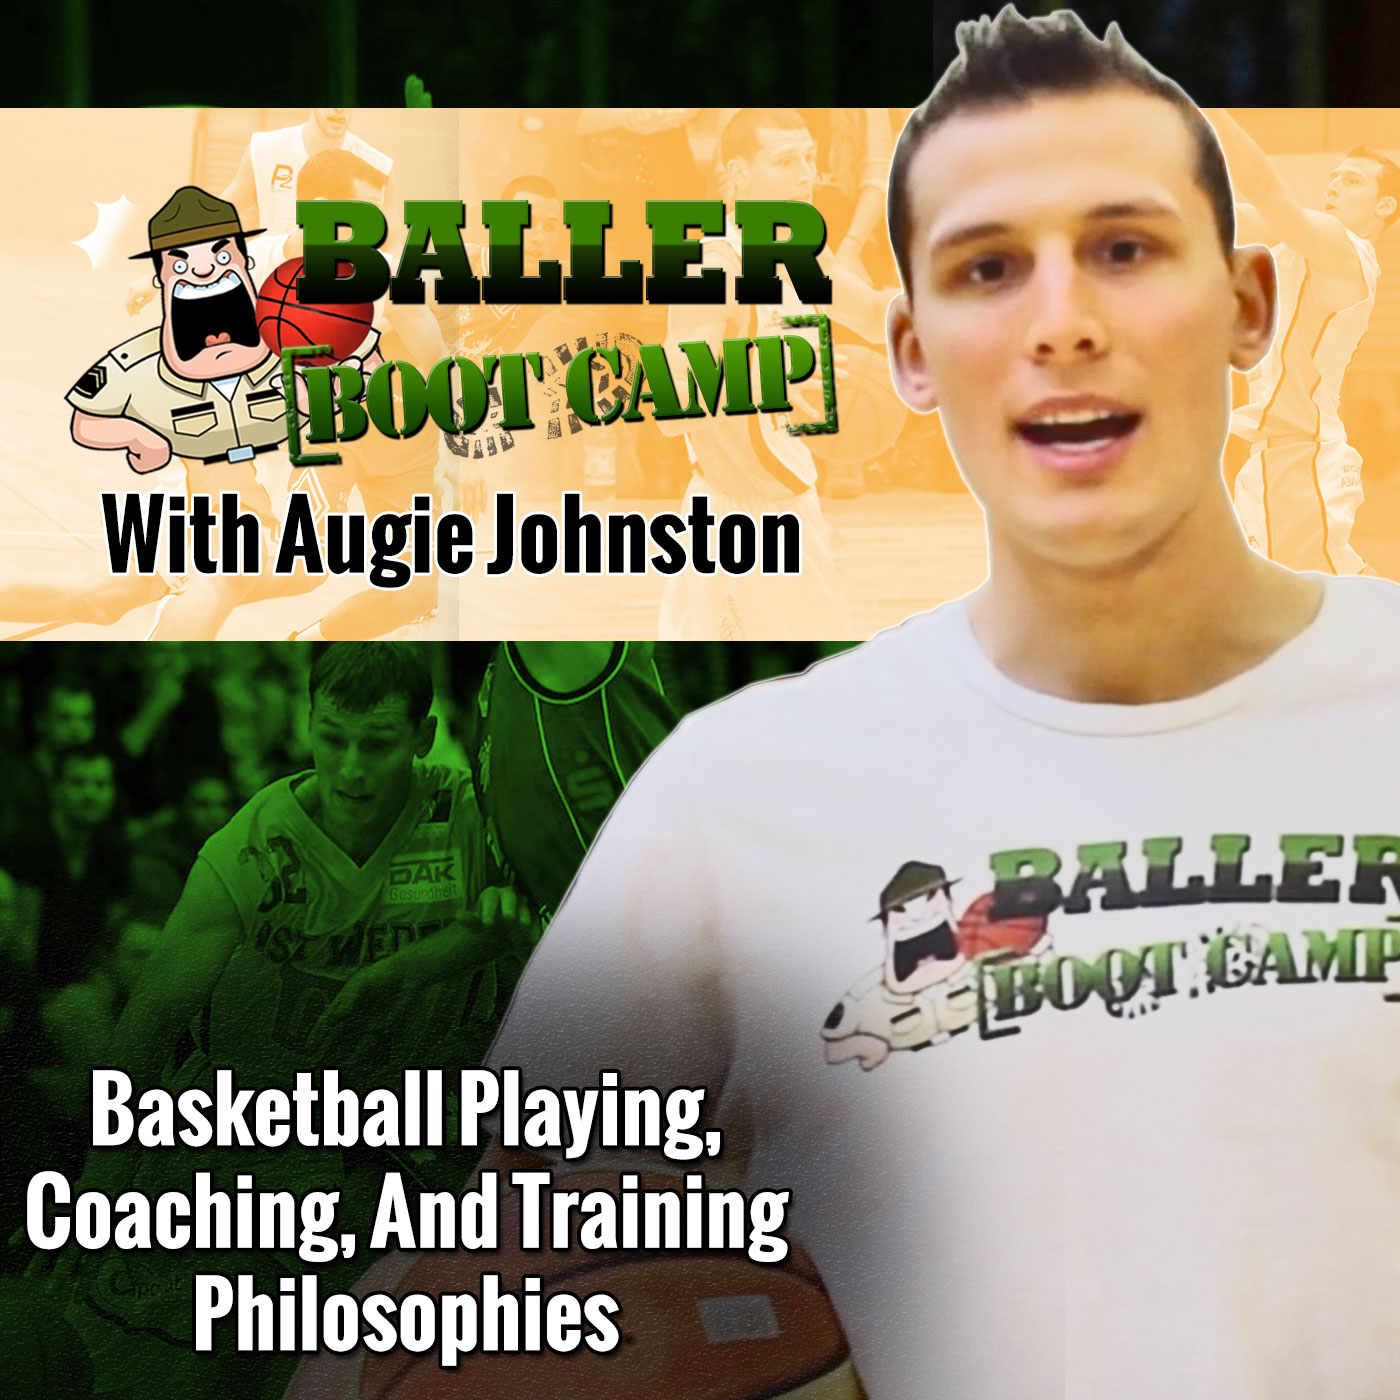 The Baller Boot Camp Podcast: Basketball Coaching, Training, and Playing Philosophies